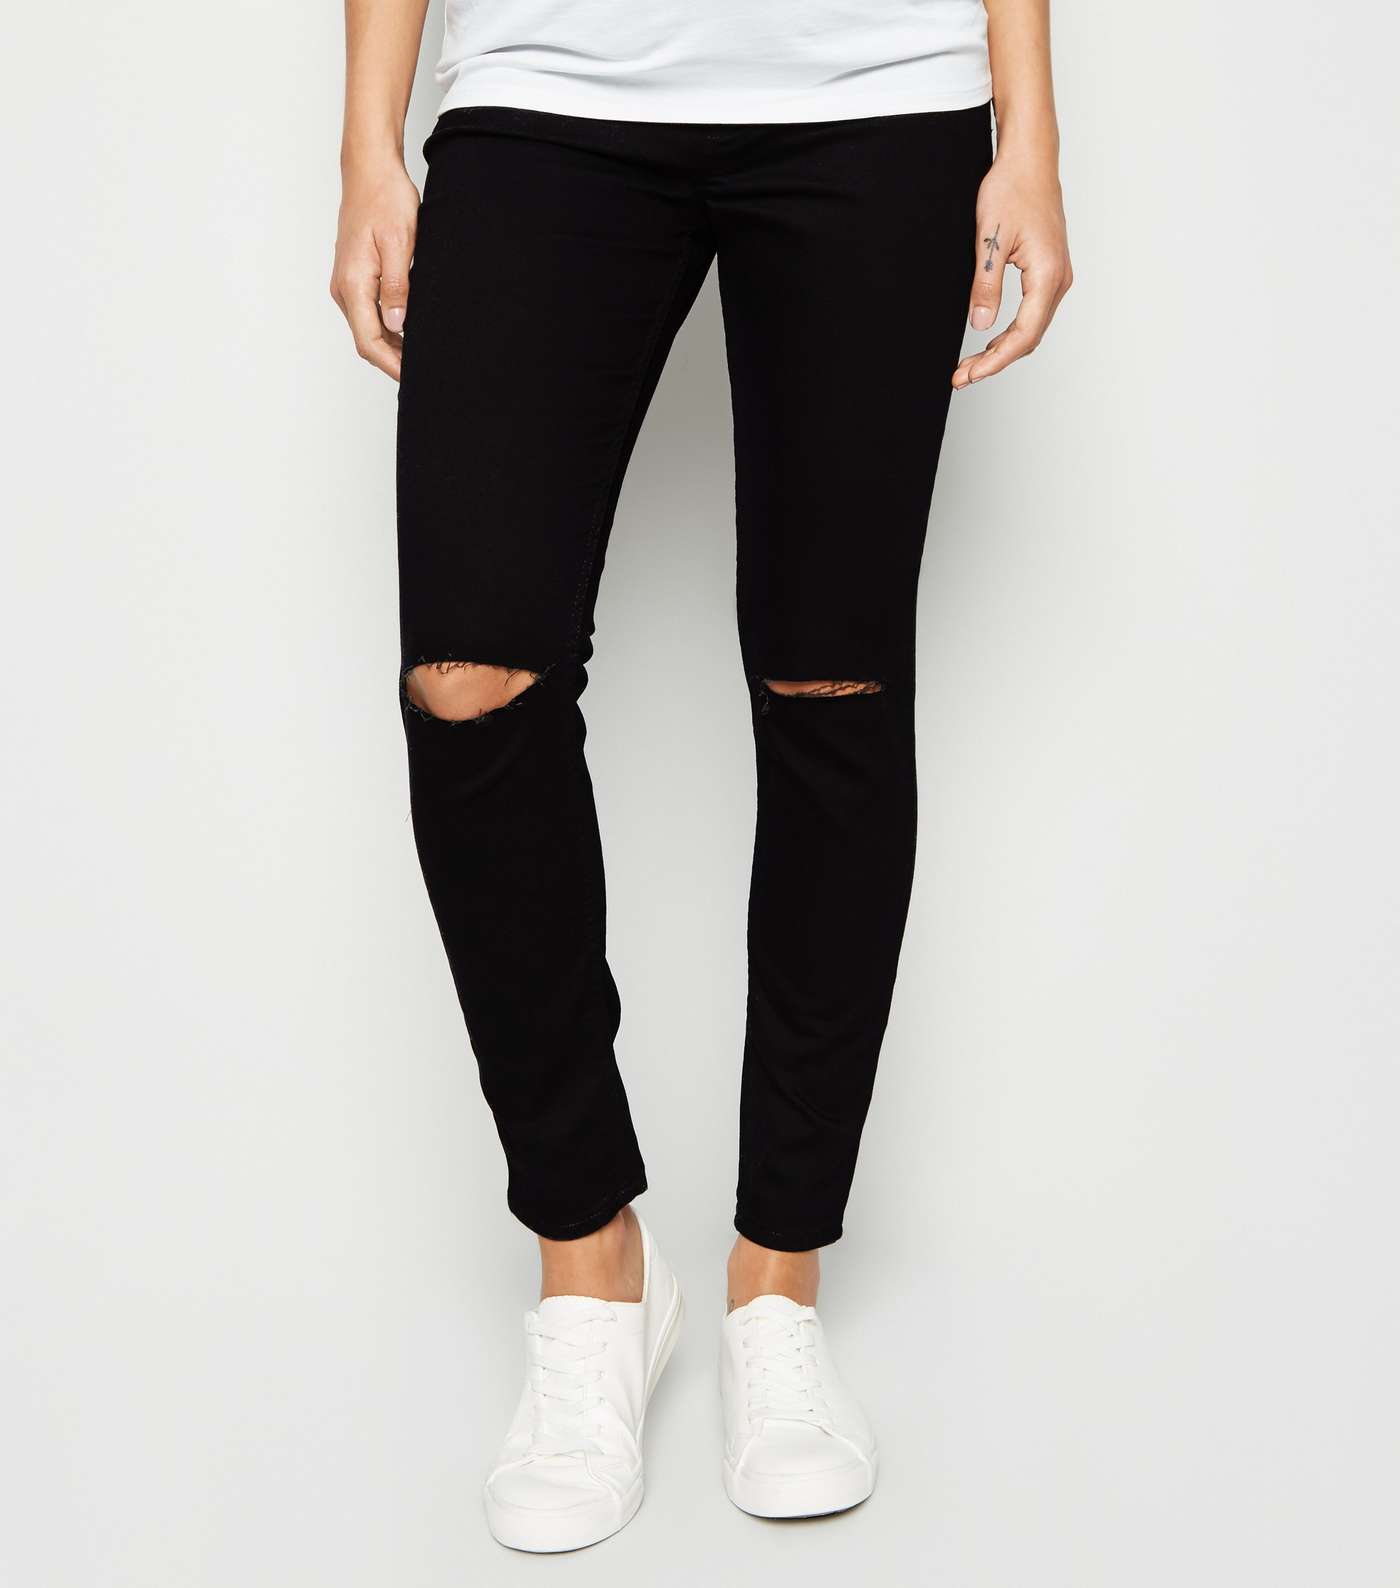 Maternity Black Ripped Over Bump Jeggings Image 2